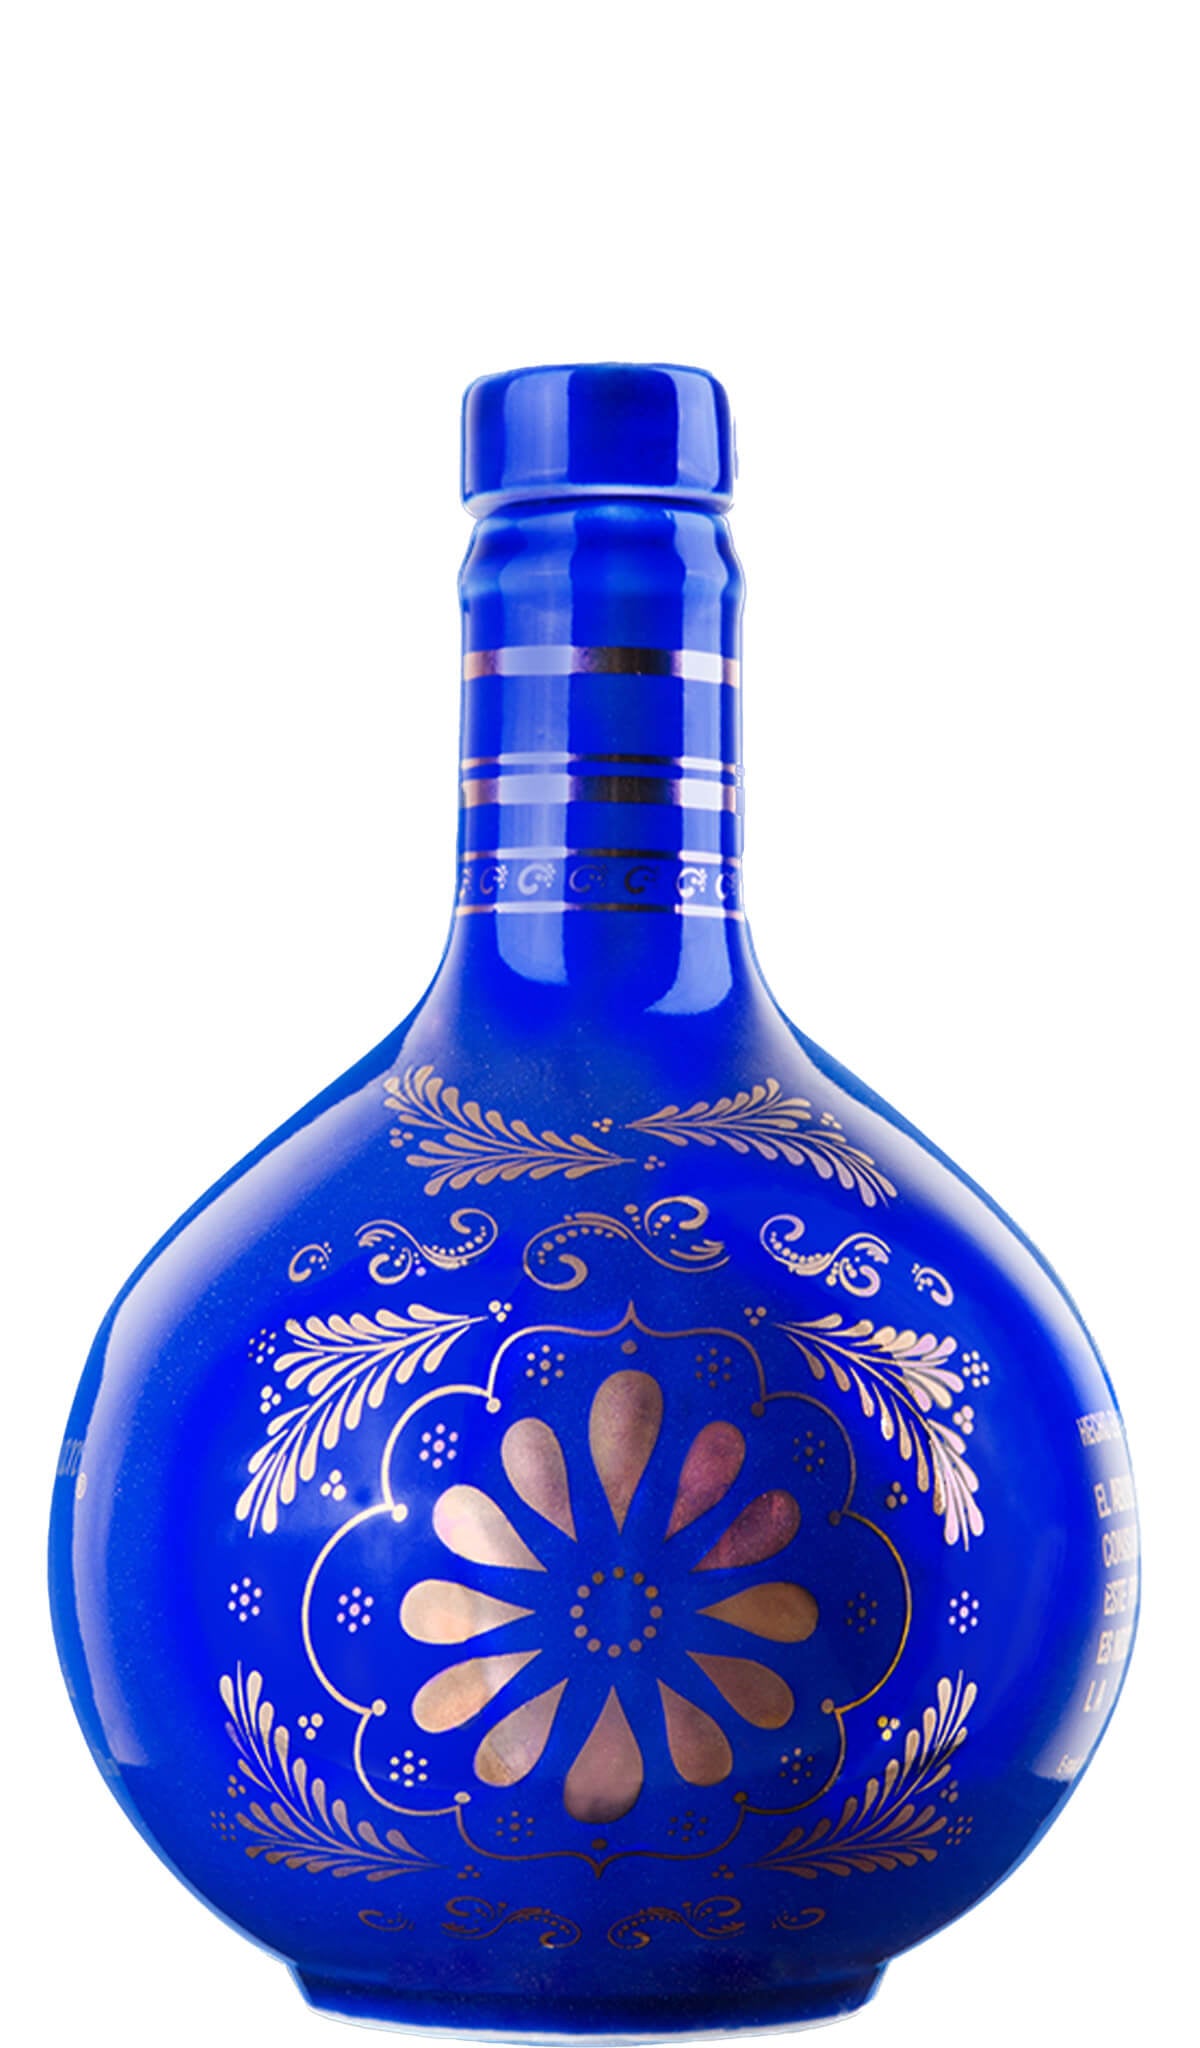 Find out more, explore the range and purchase Grand Mayan Reposado Tequila 750mL available online at Wine Sellers Direct - Australia's independent liquor specialists.